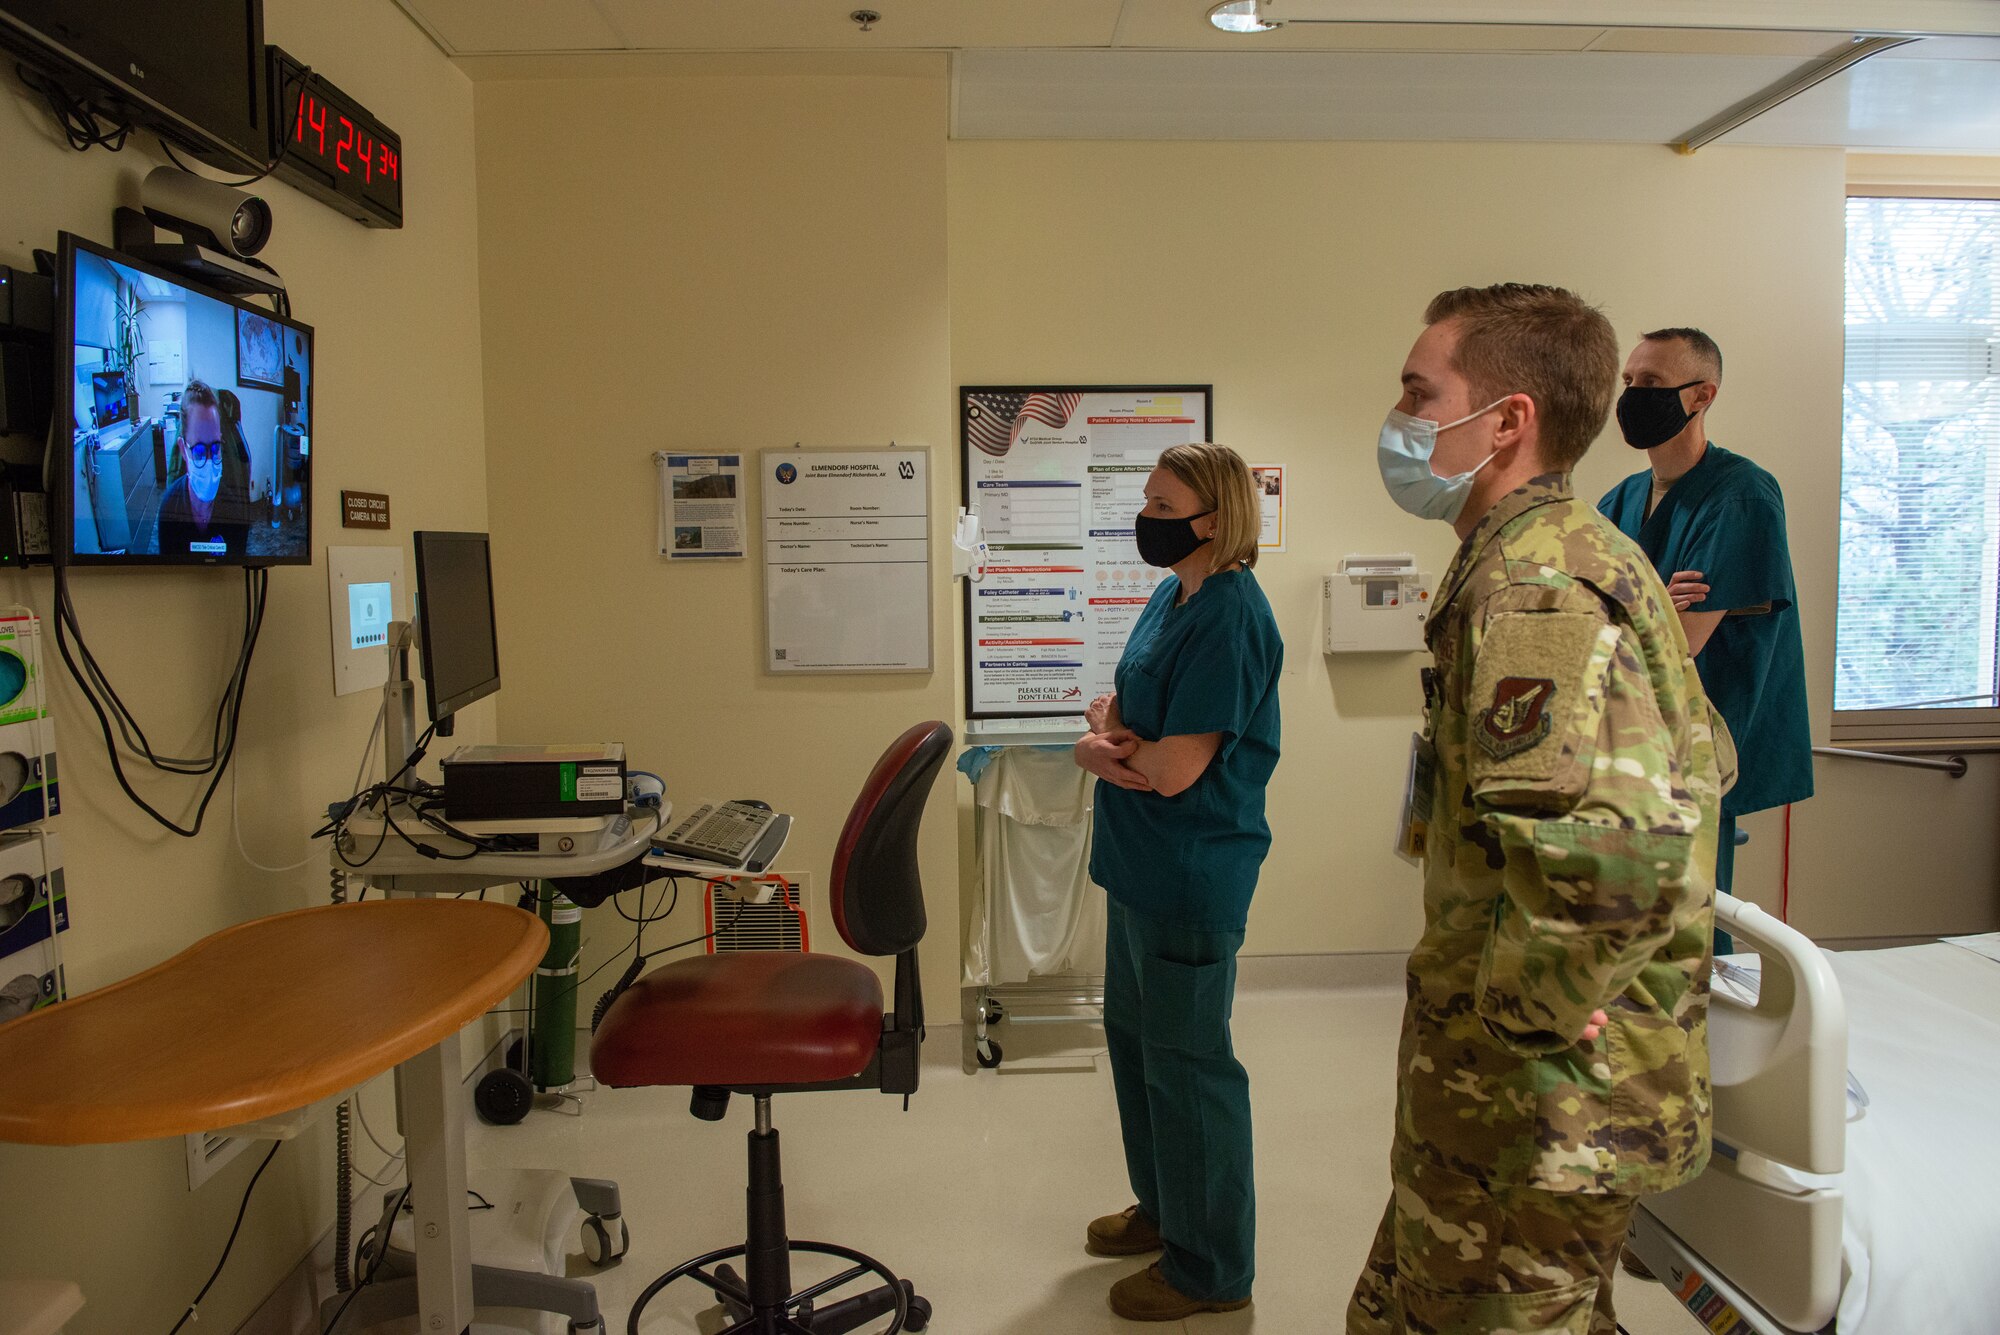 U.S. Air Force 1st Lt. Nicholas Westphalen, front, an intensive care unit clinical care nurse with the 673d Inpatient Operations Squadron, views a telemedicine television screen with U.S. Air Force Col. Kirsten Aguilar, center, Joint Base Elmendorf-Richardson and 673d Air Base Wing commander, and U.S. Air Force Chief Master Sgt. Lee Mills, JBER and 673d ABW command chief, at JBER, Alaska, Feb 26, 2021. The tour familiarized base leadership with the 673d IPTS and its role in supporting readiness. The 673d IPTS provides a full range of medical care to include perinatal care, intensive care, and behavioral health services to JBER and the greater Anchorage area.